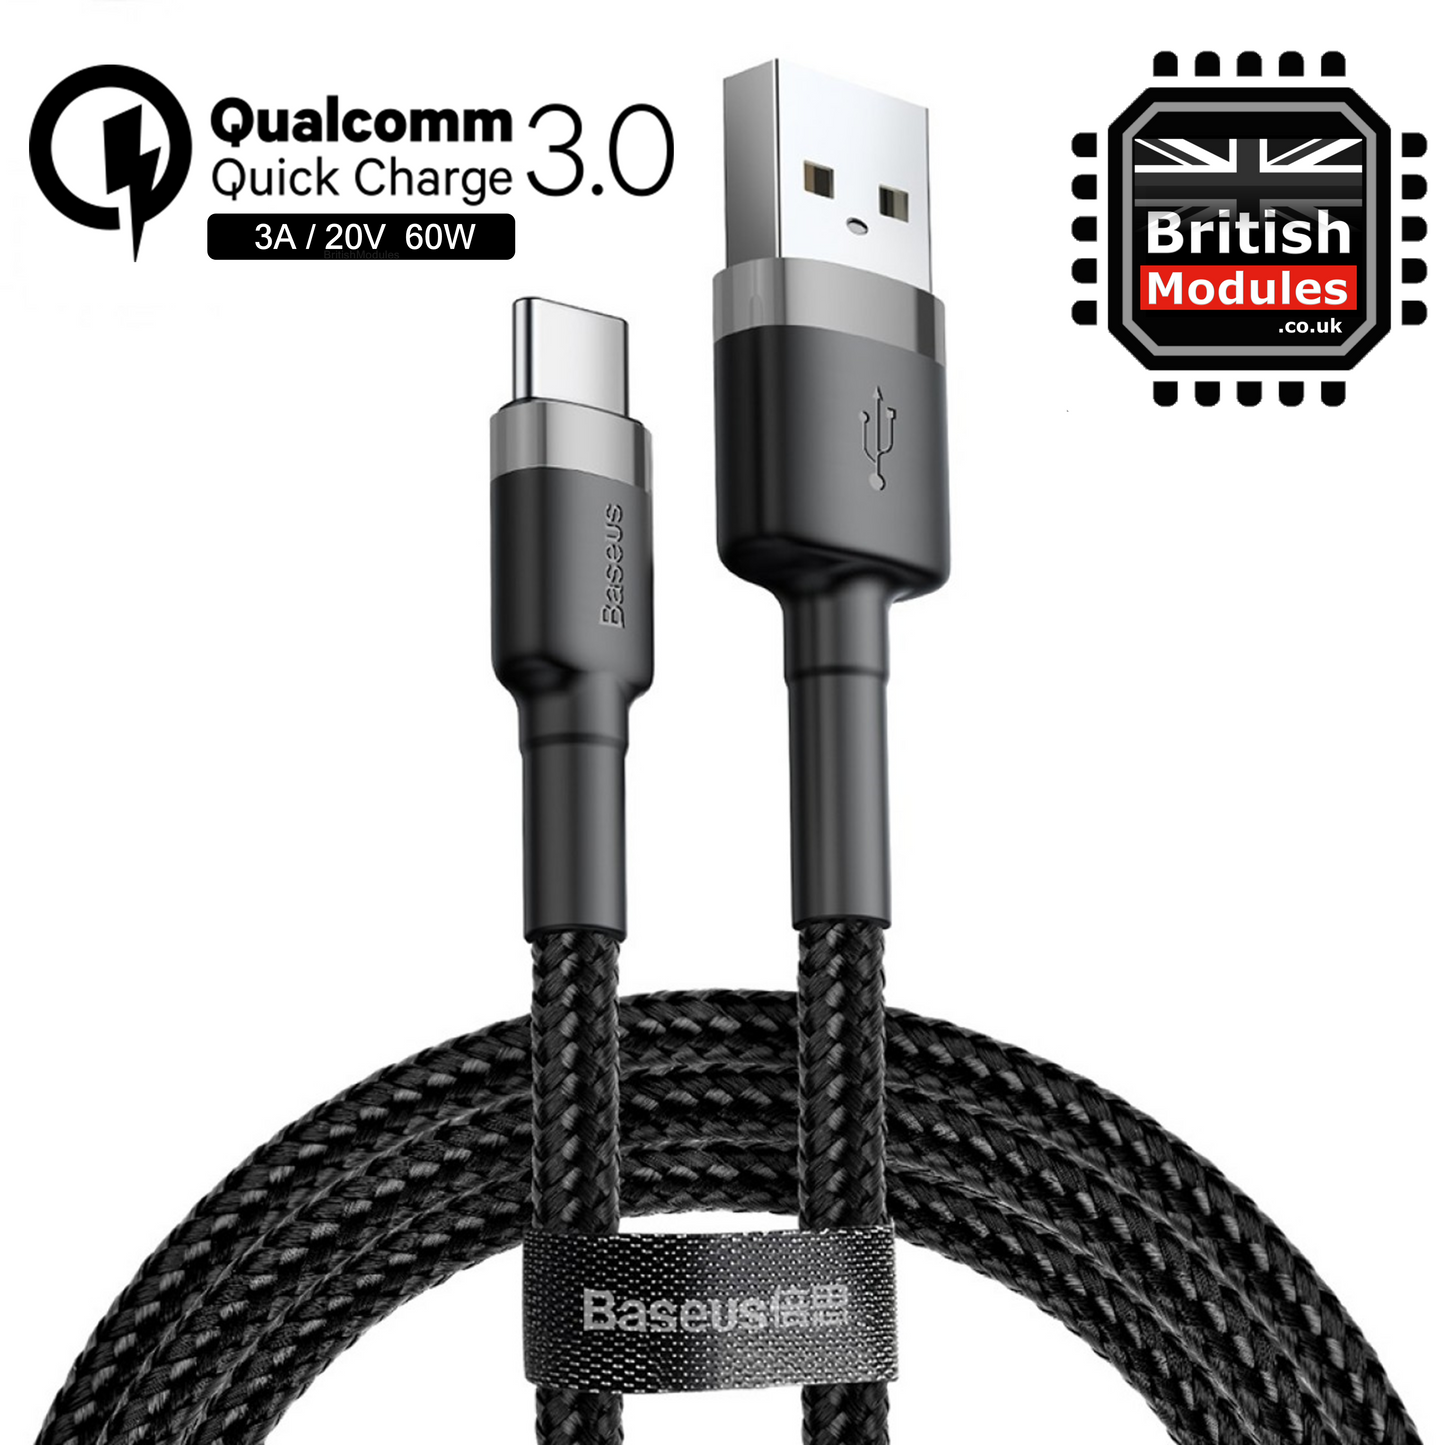 2M Baseus Braided USB Type C QC 3.0 Fast Charging Cable Cord 3A Quick Charger